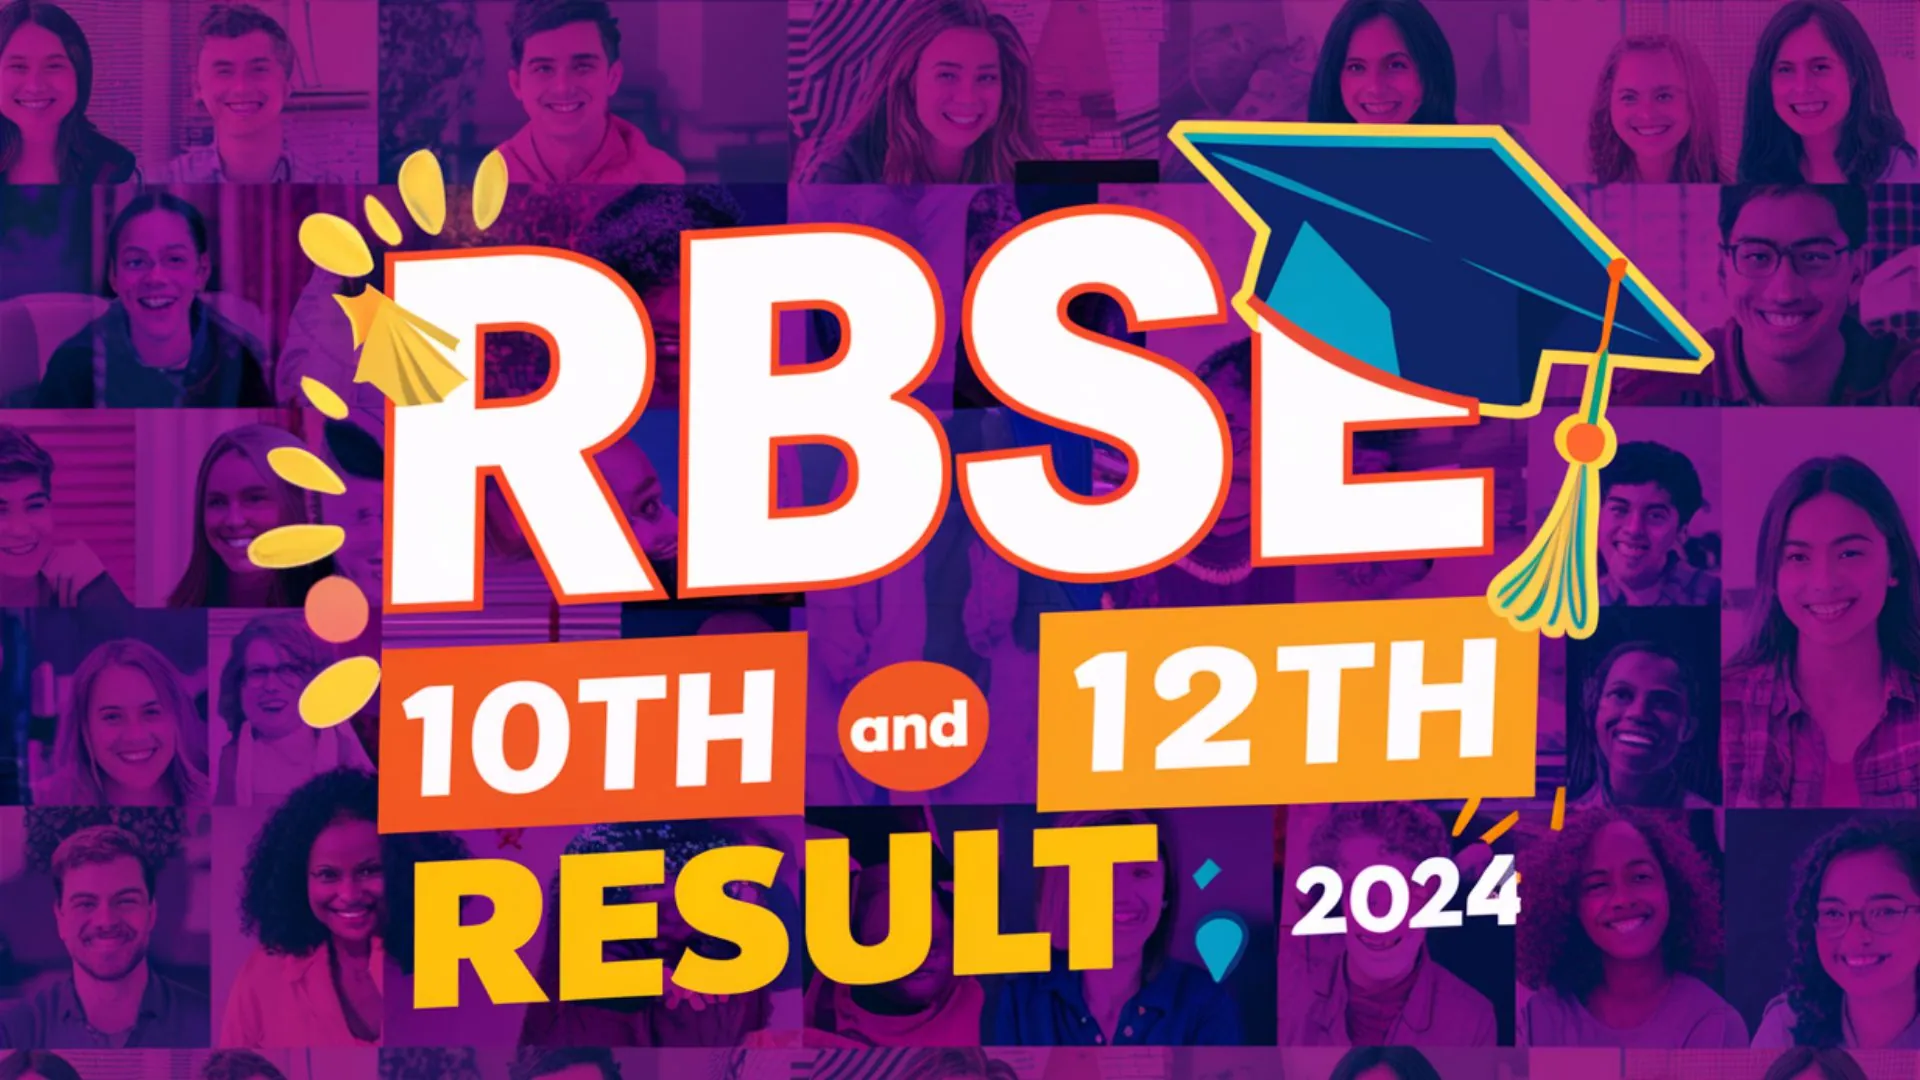 RBSE 10th 12th Result 2024